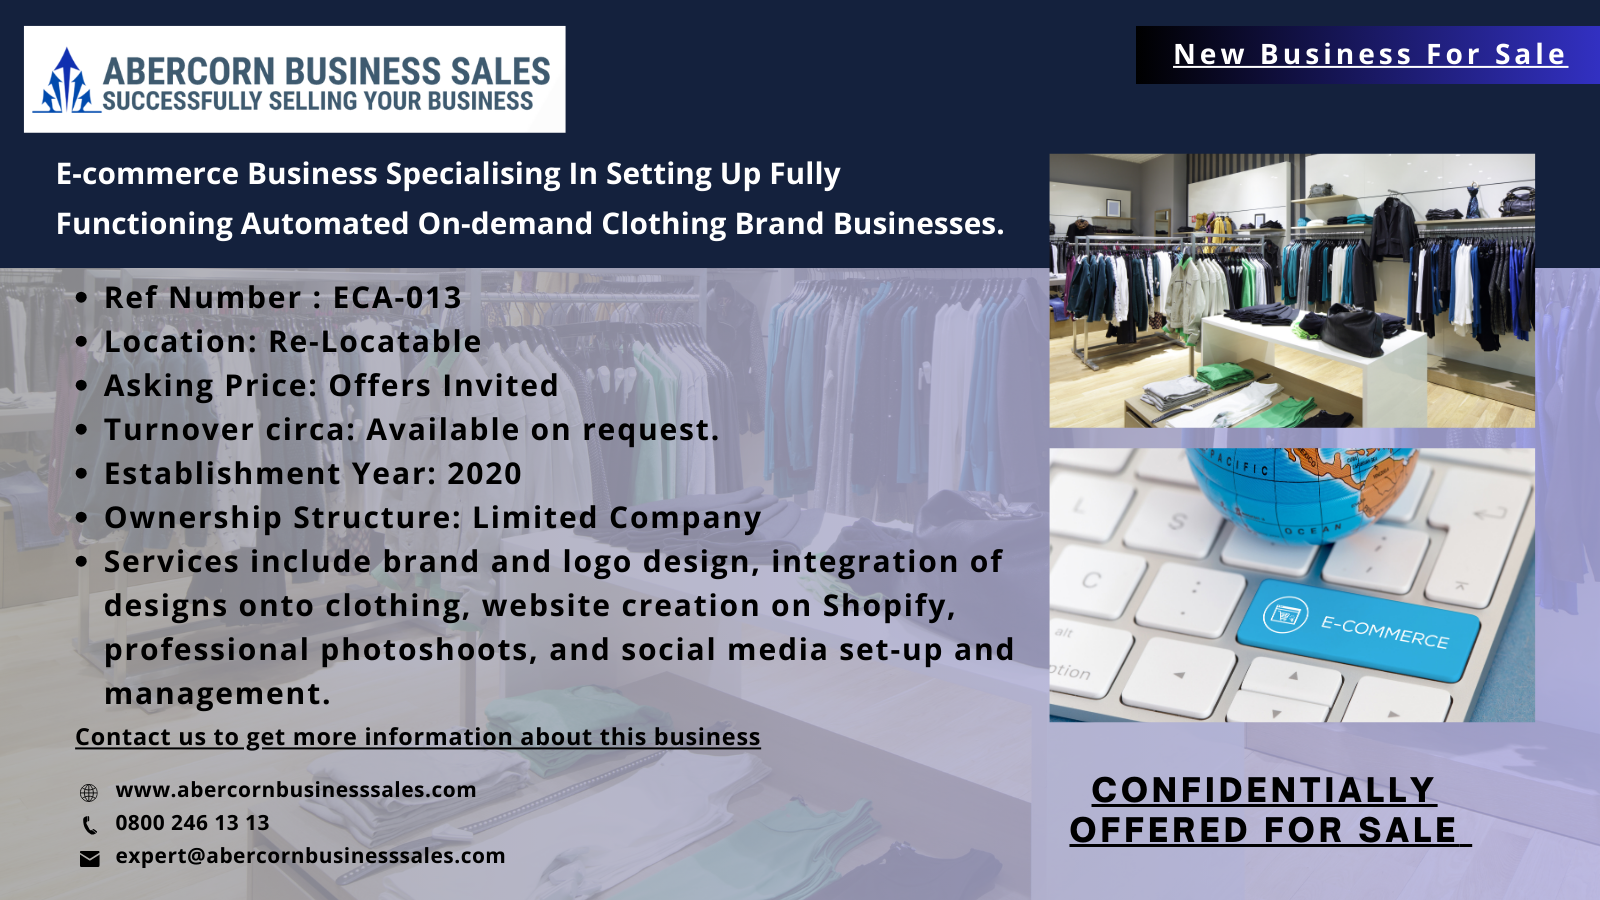 ECA-013 - E-commerce Business Specialising In Setting Up Fully Functioning Automated On-demand Clothing Brand Businesses